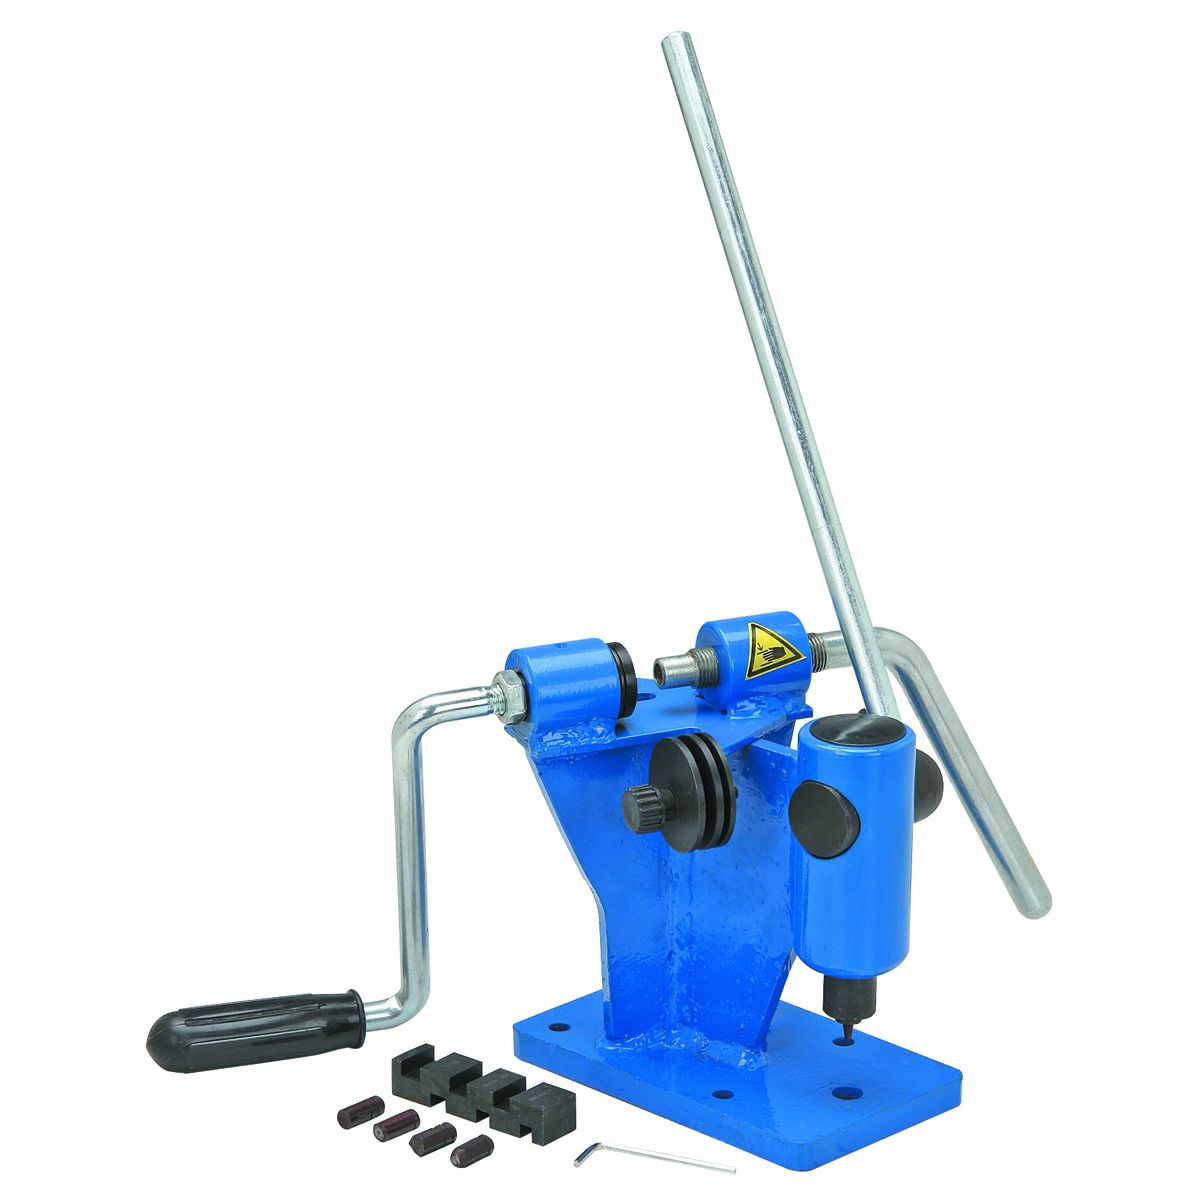 CENTRAL MACHINERY Chain Breaker/Spinner for Chain Saws